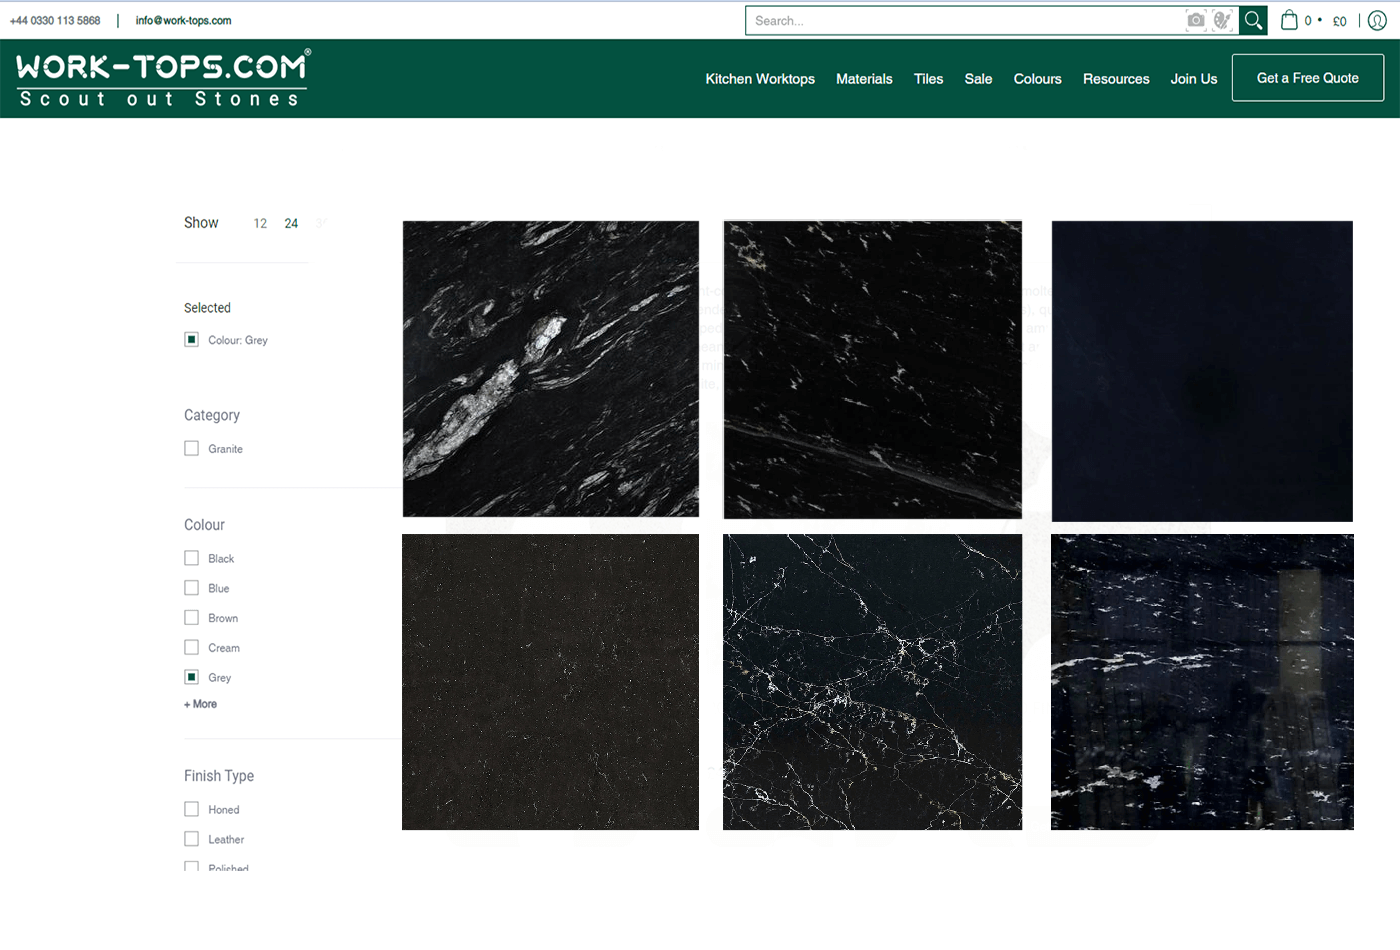 Are You Looking for More Black Worktops